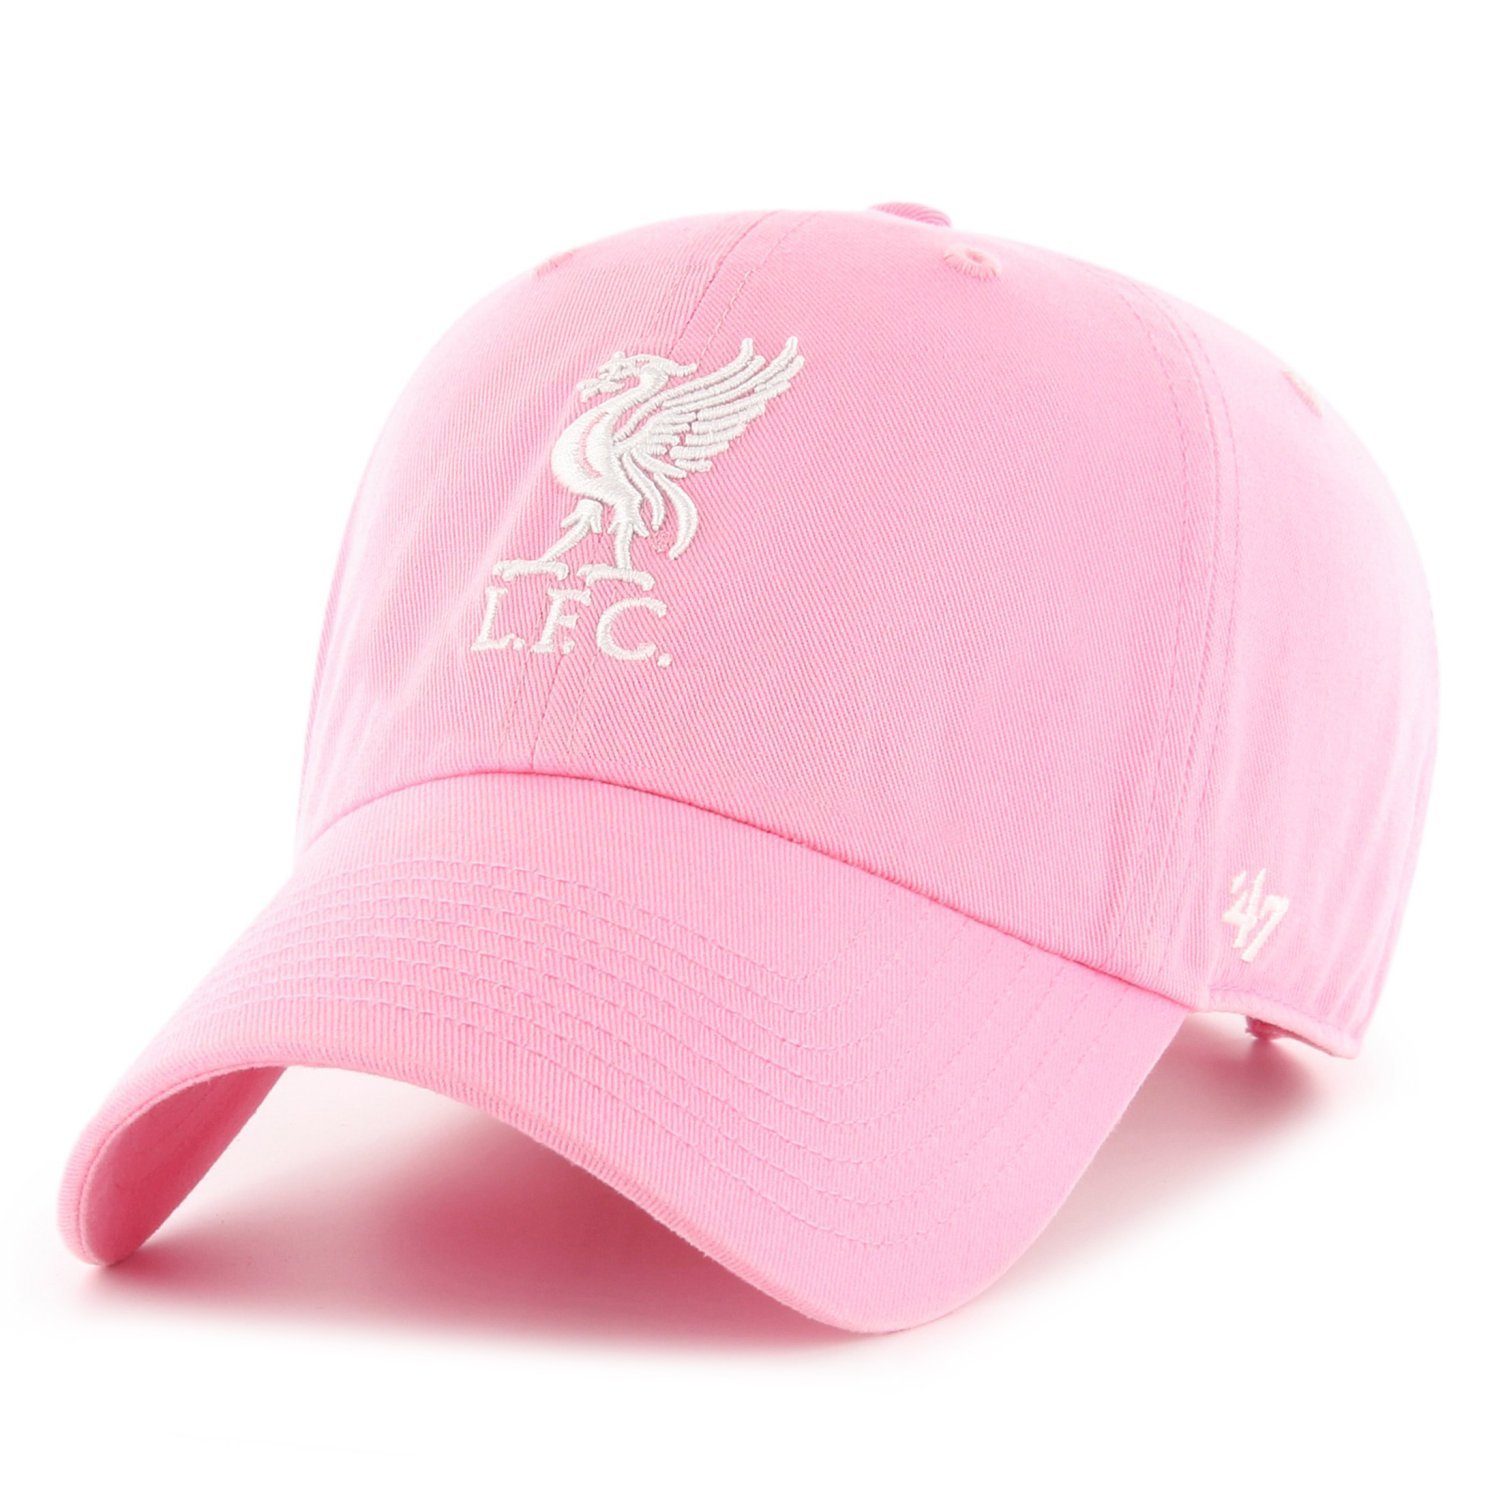 '47 Brand Trucker Cap Relaxed Fit CLEAN UP FC Liverpool